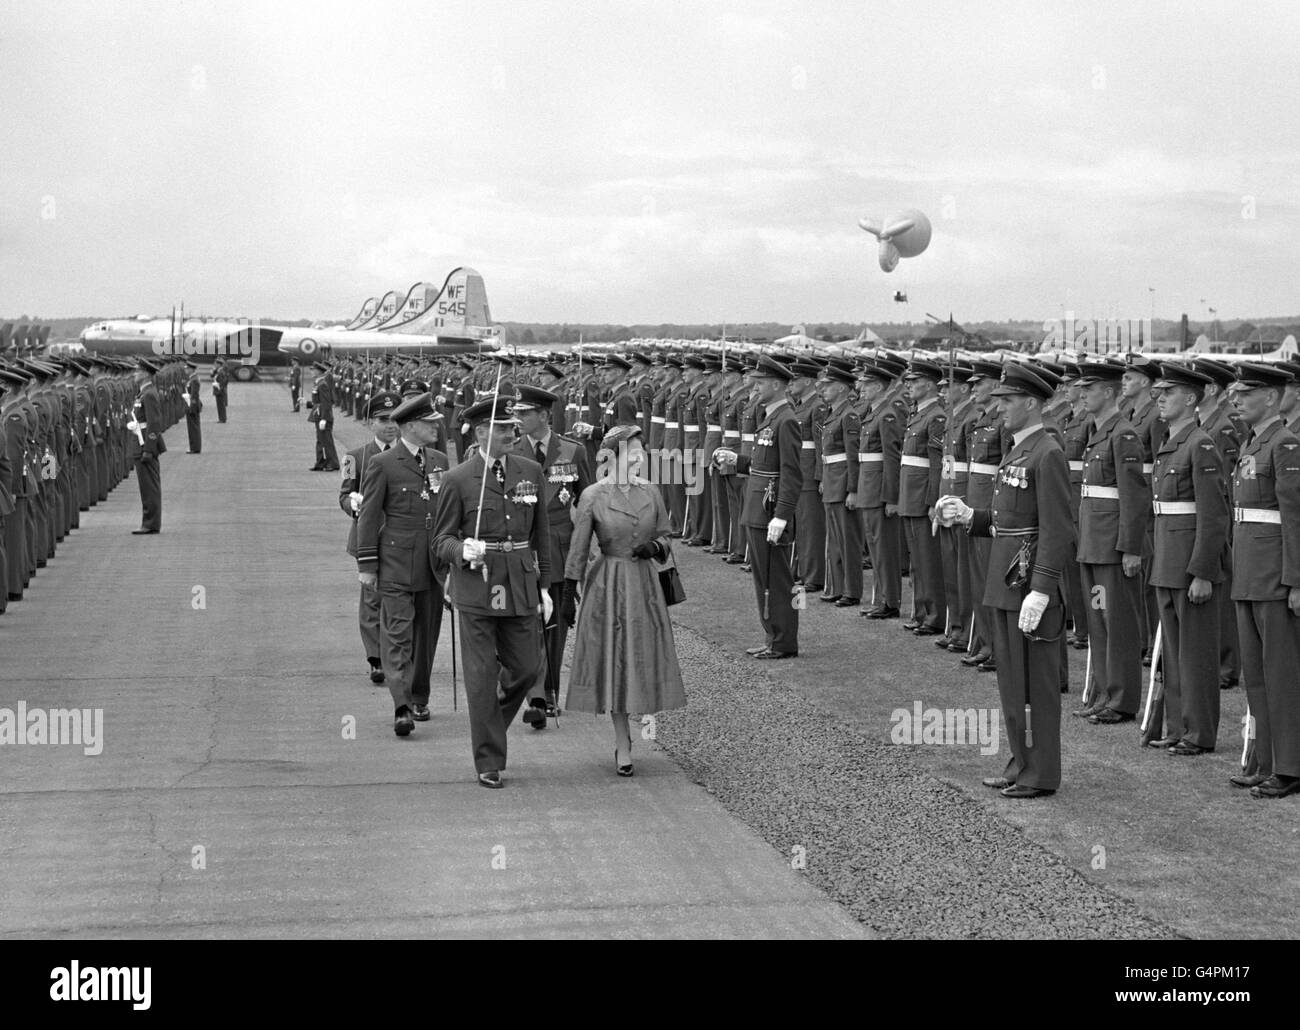 Queen Elizabeth II reviewing the Royal Air Force at Odiham Airfield, lined up with the mass of planes in the background. Following behind the Queen is the Duke of Edinburgh, in marshal of the RAF uniform. Stock Photo